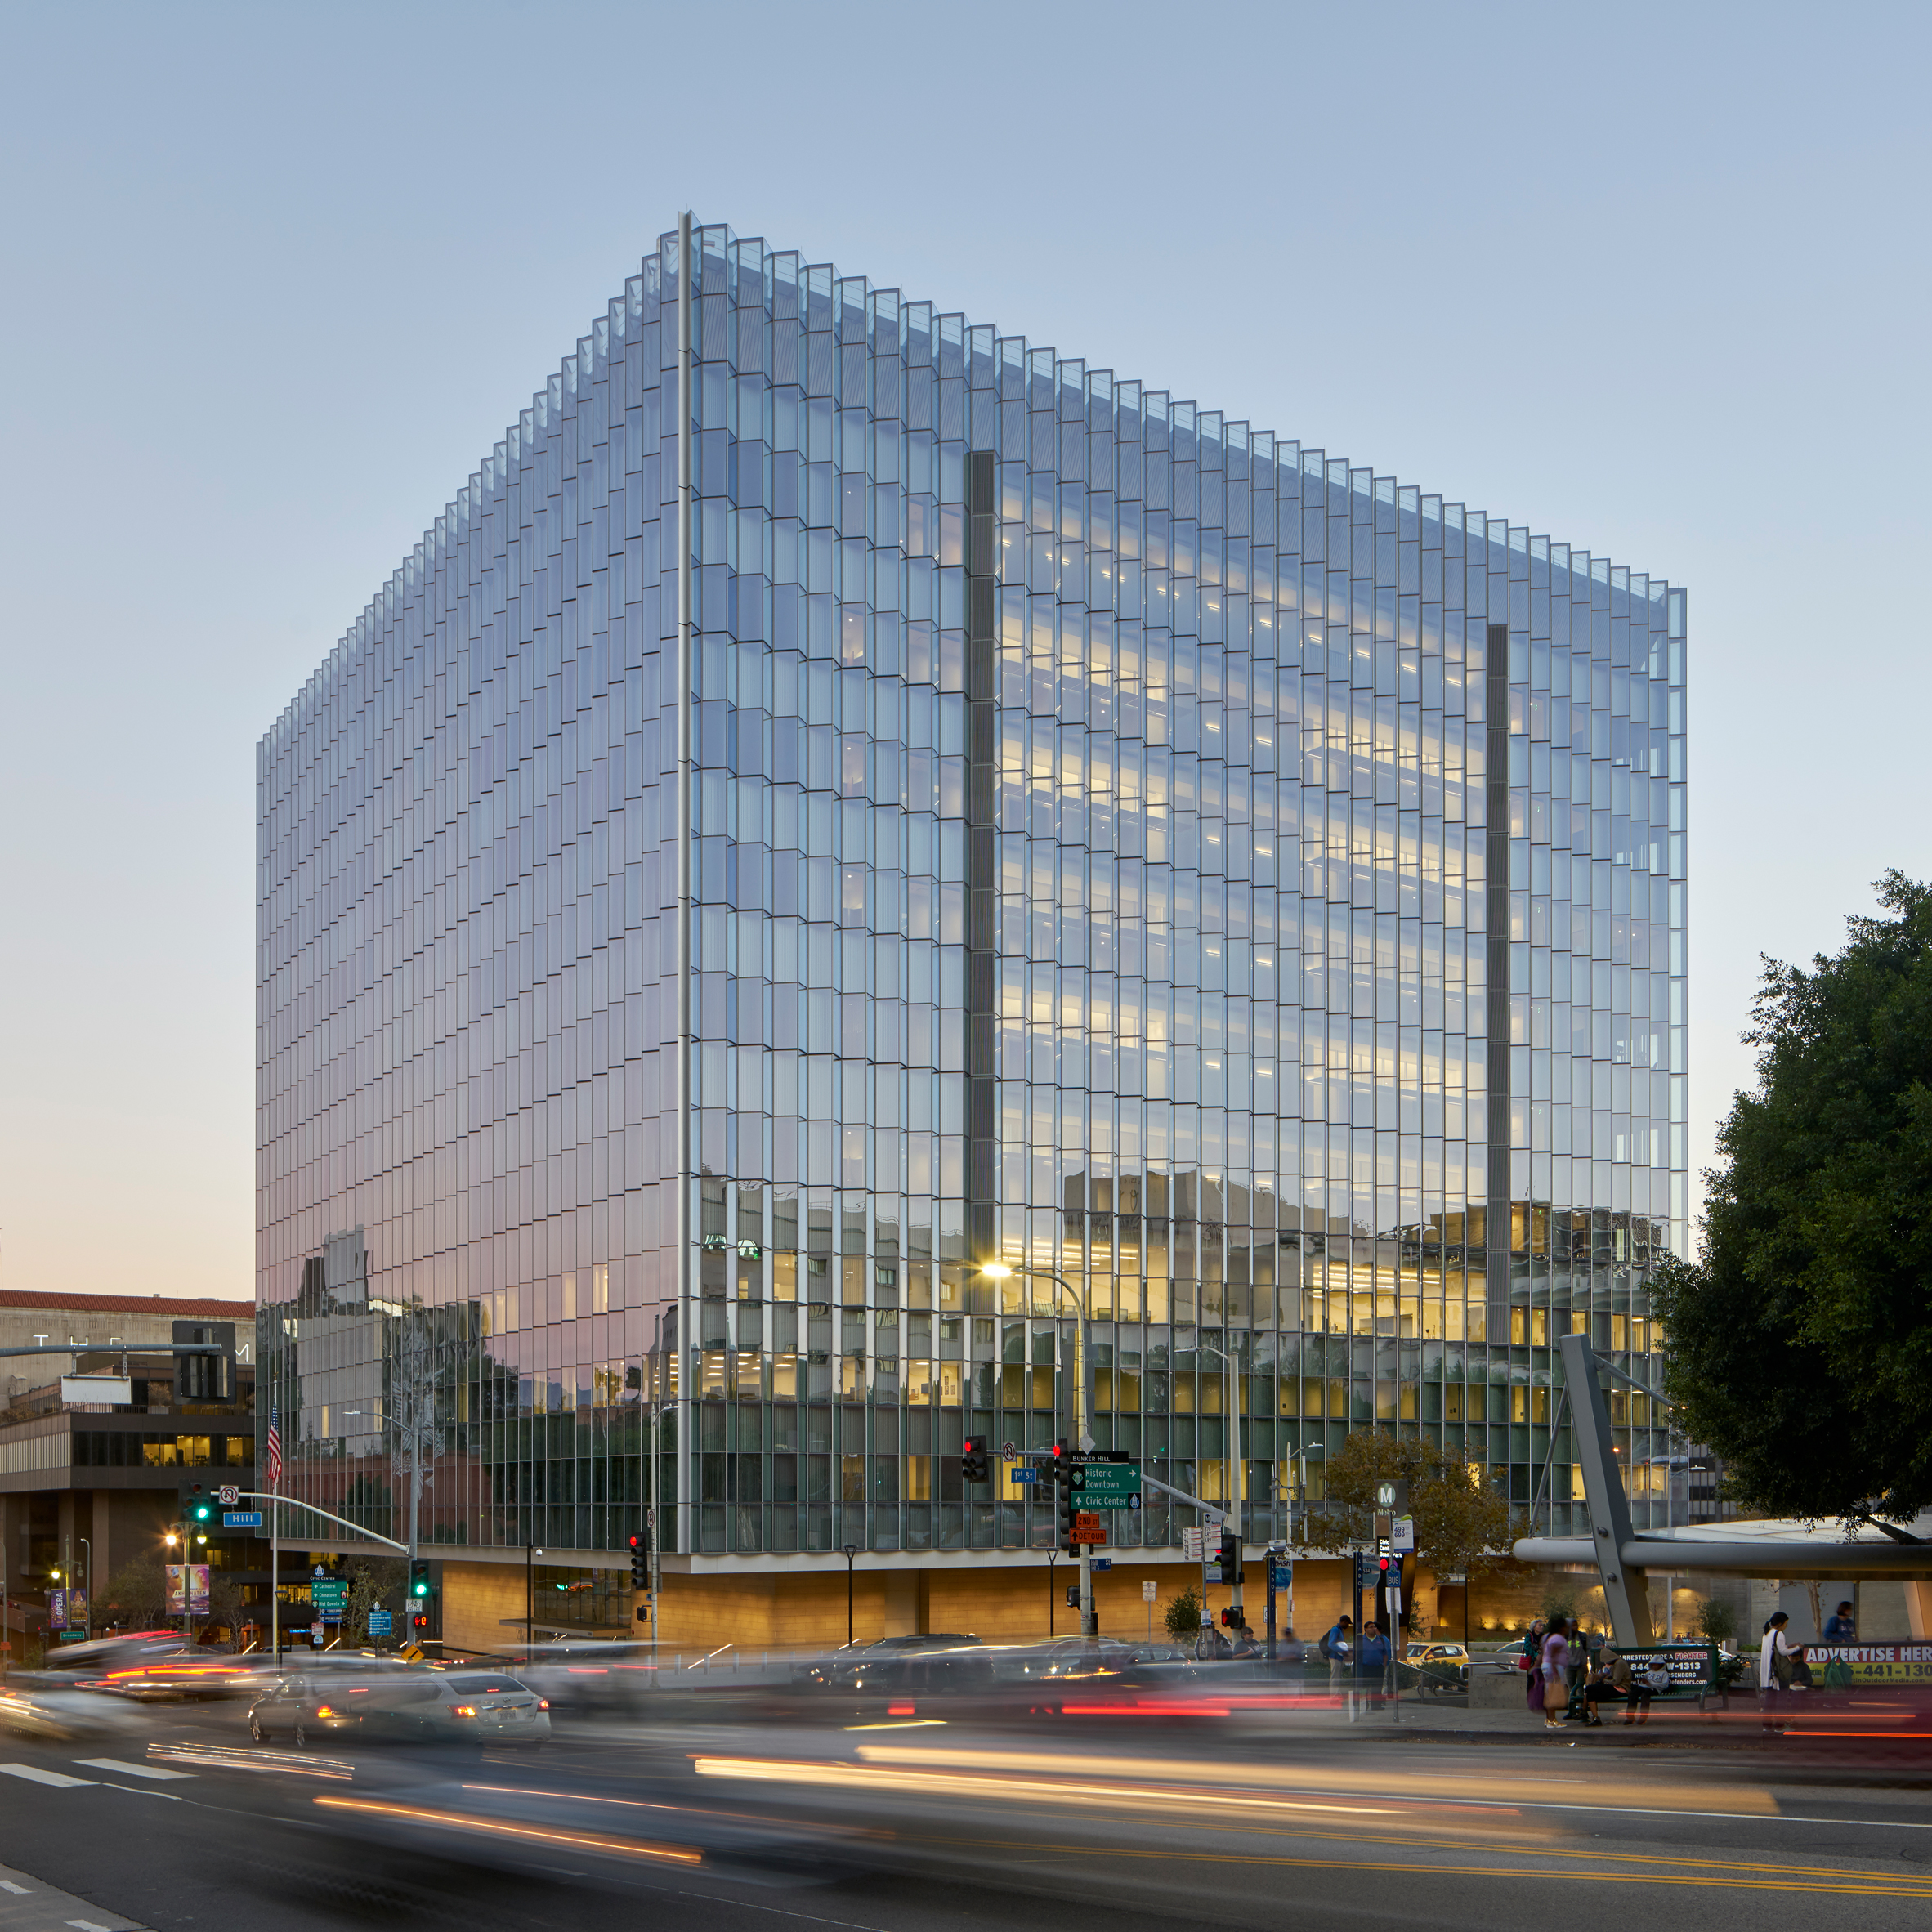 New United States Courthouse; Los Angeles, by Skidmore, Owings & Merrill